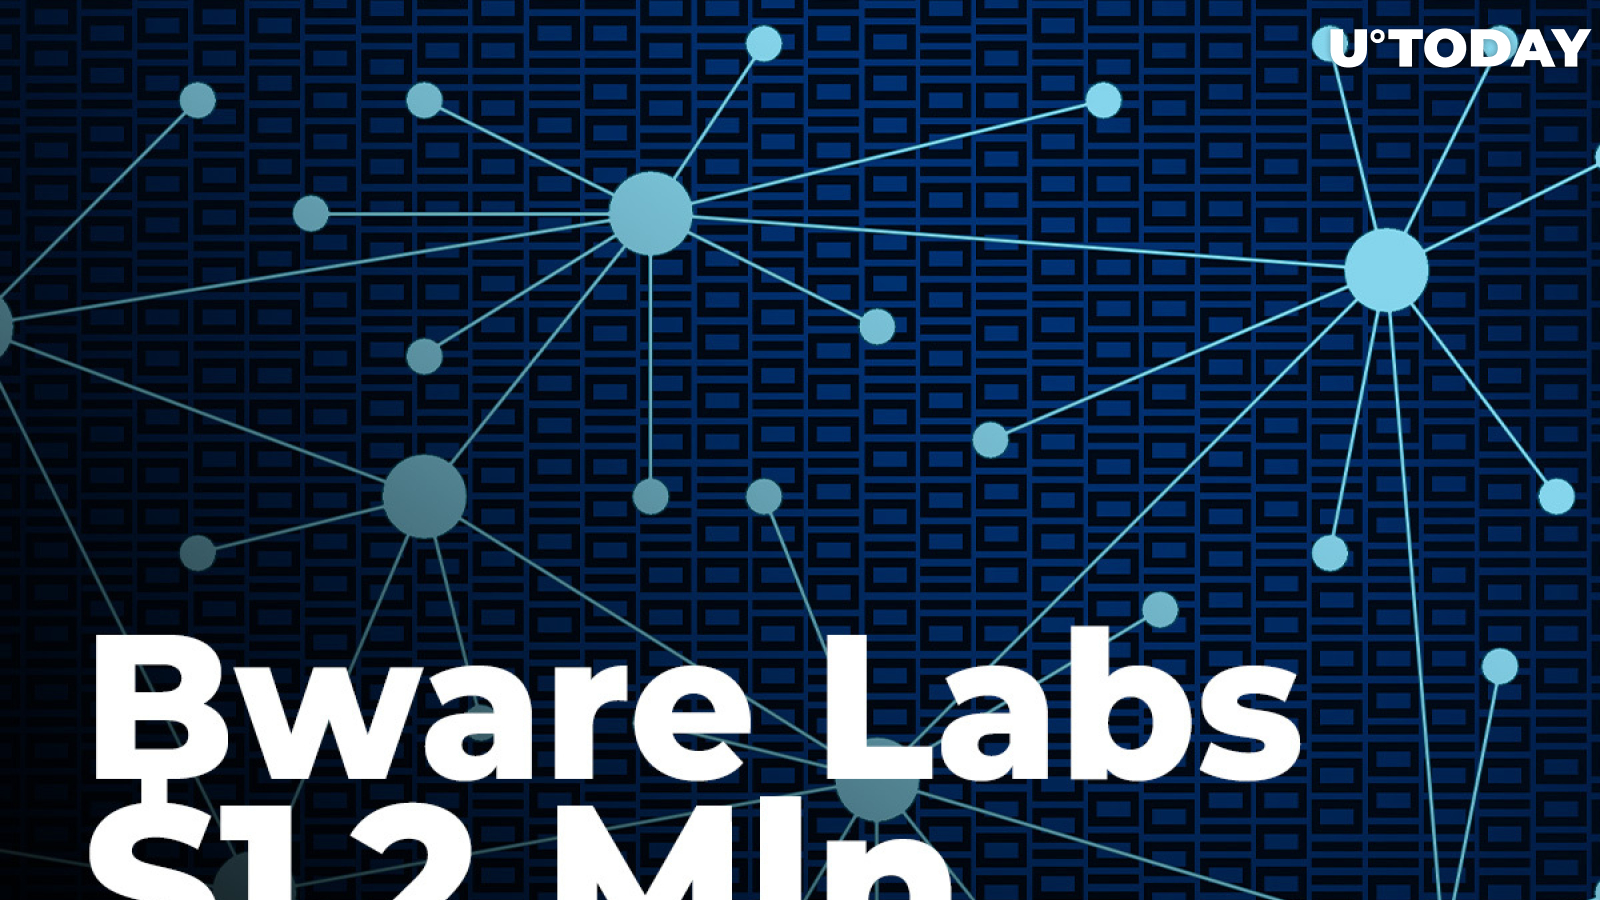 Bware Labs (BWR) Raises $1.2 Million to Release First-Ever Decentralized API Marketplace